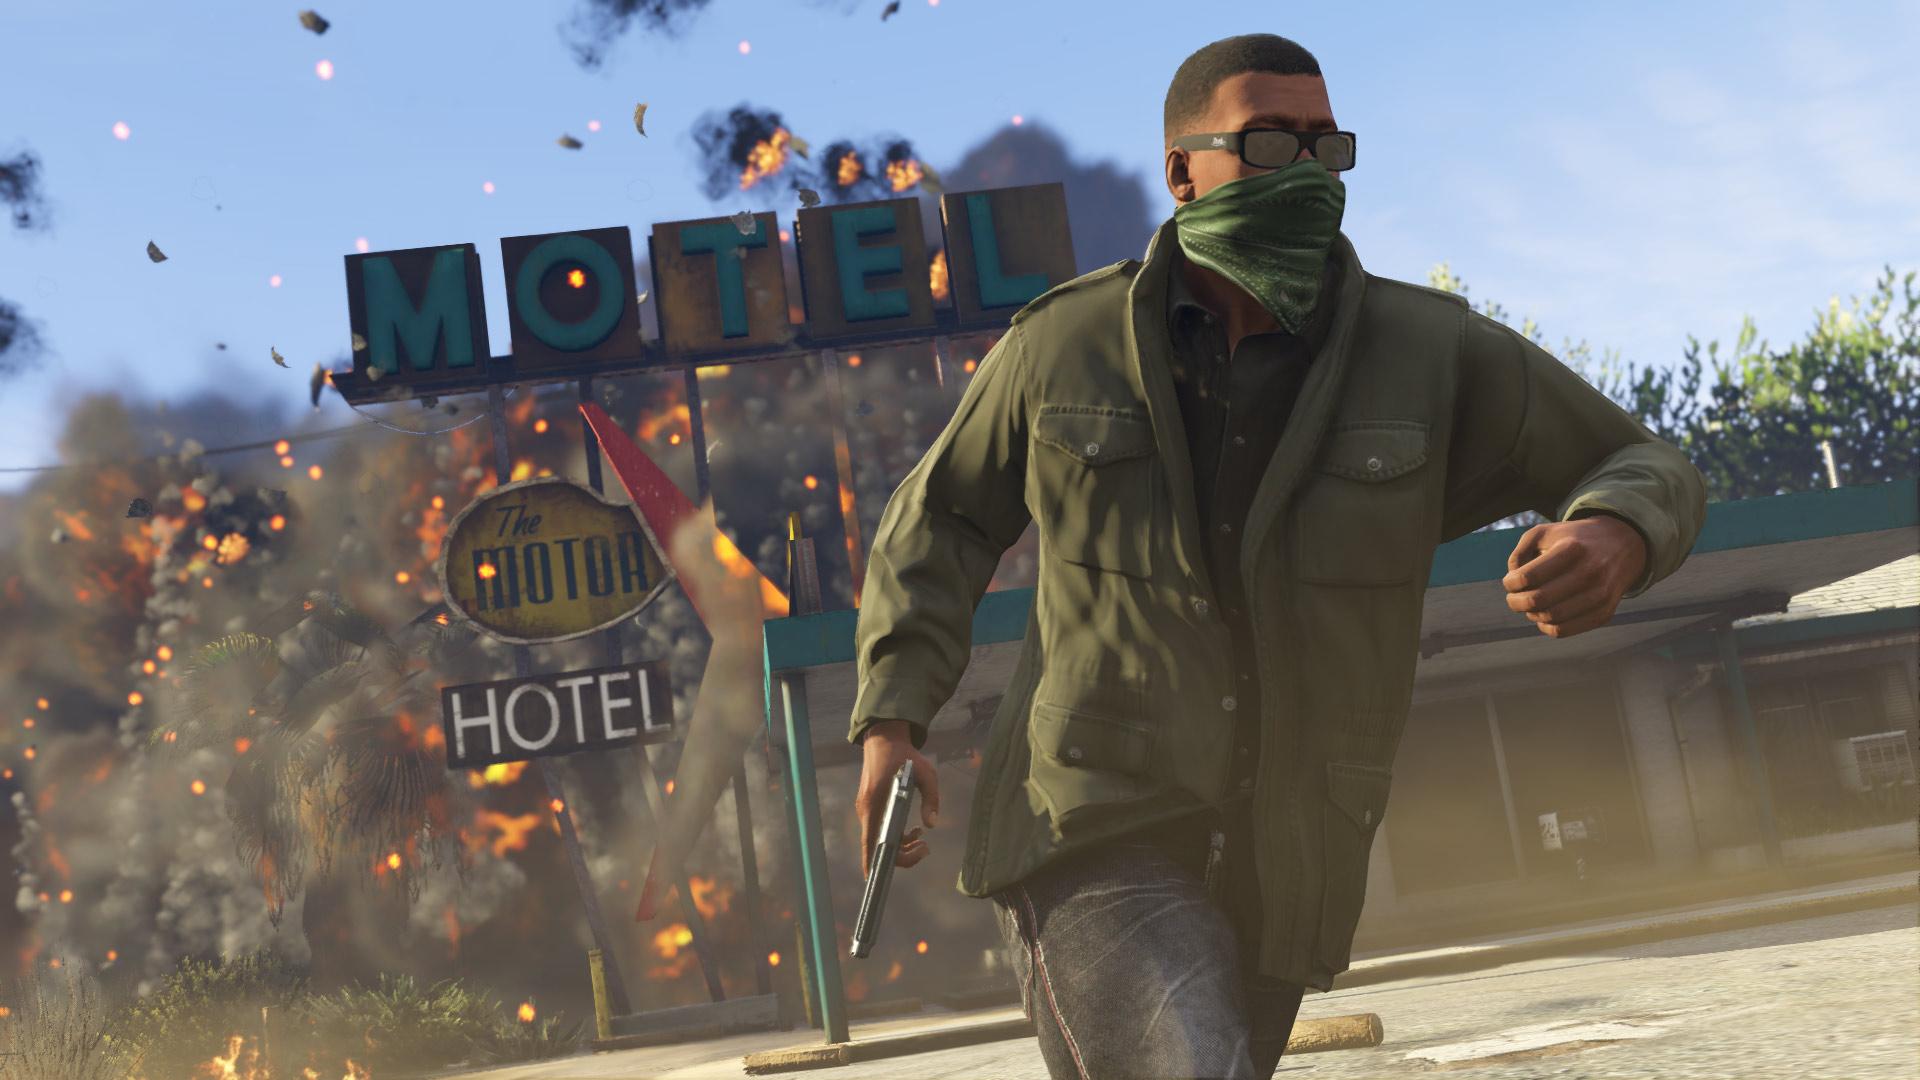 An image of a character from Grand Theft Auto V running away from an explosion.